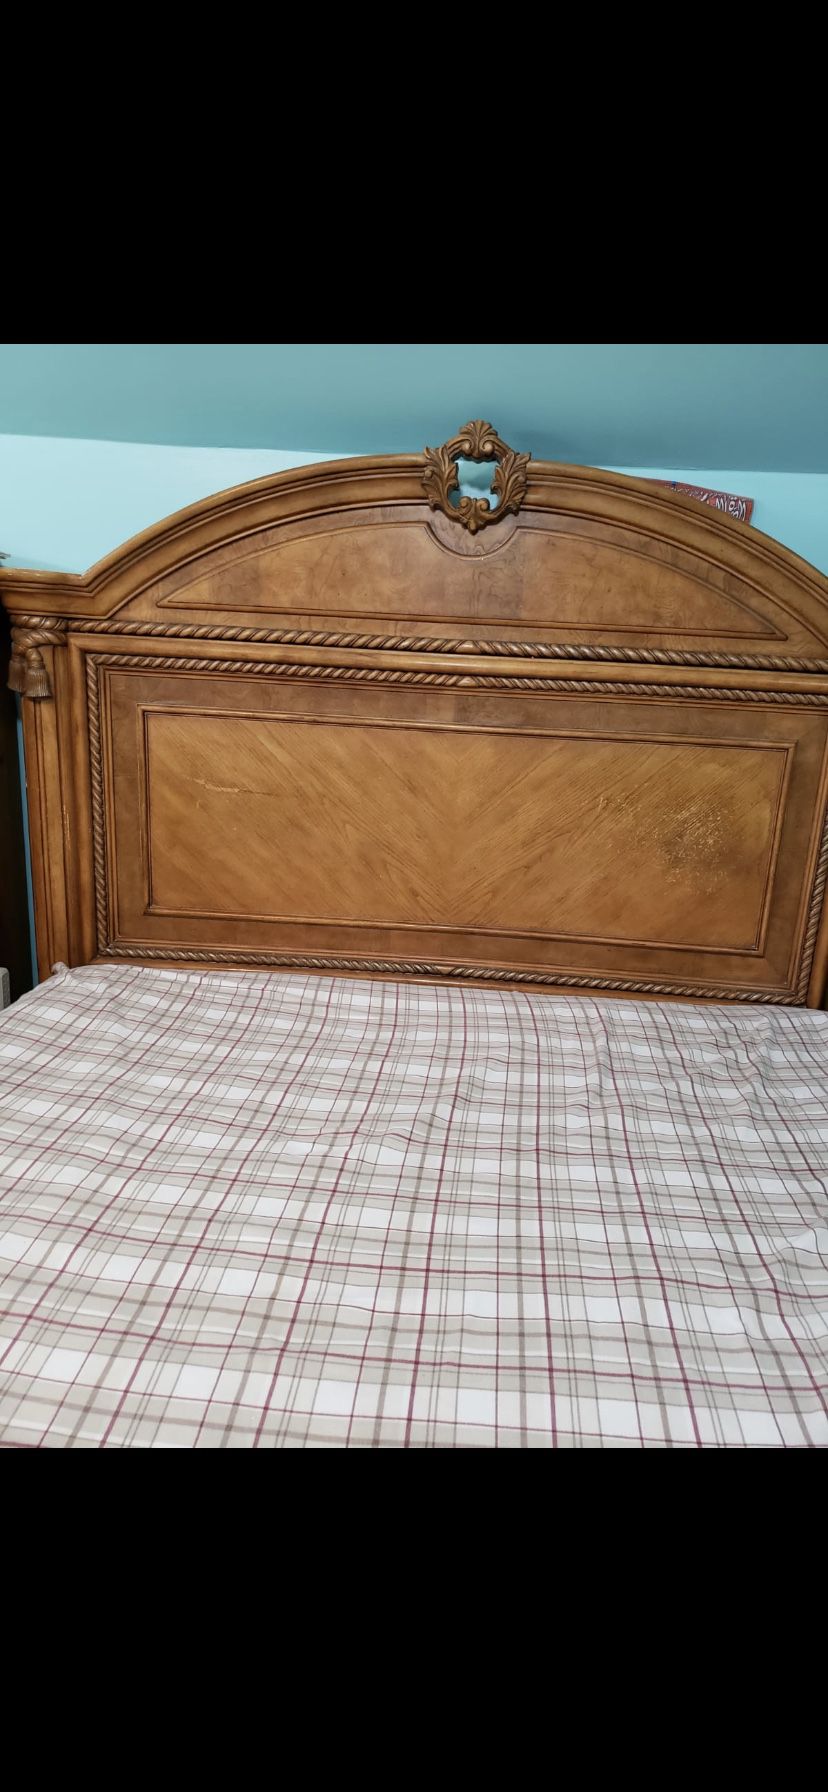 REAL SOLID WOOD BED SET (heavy set)